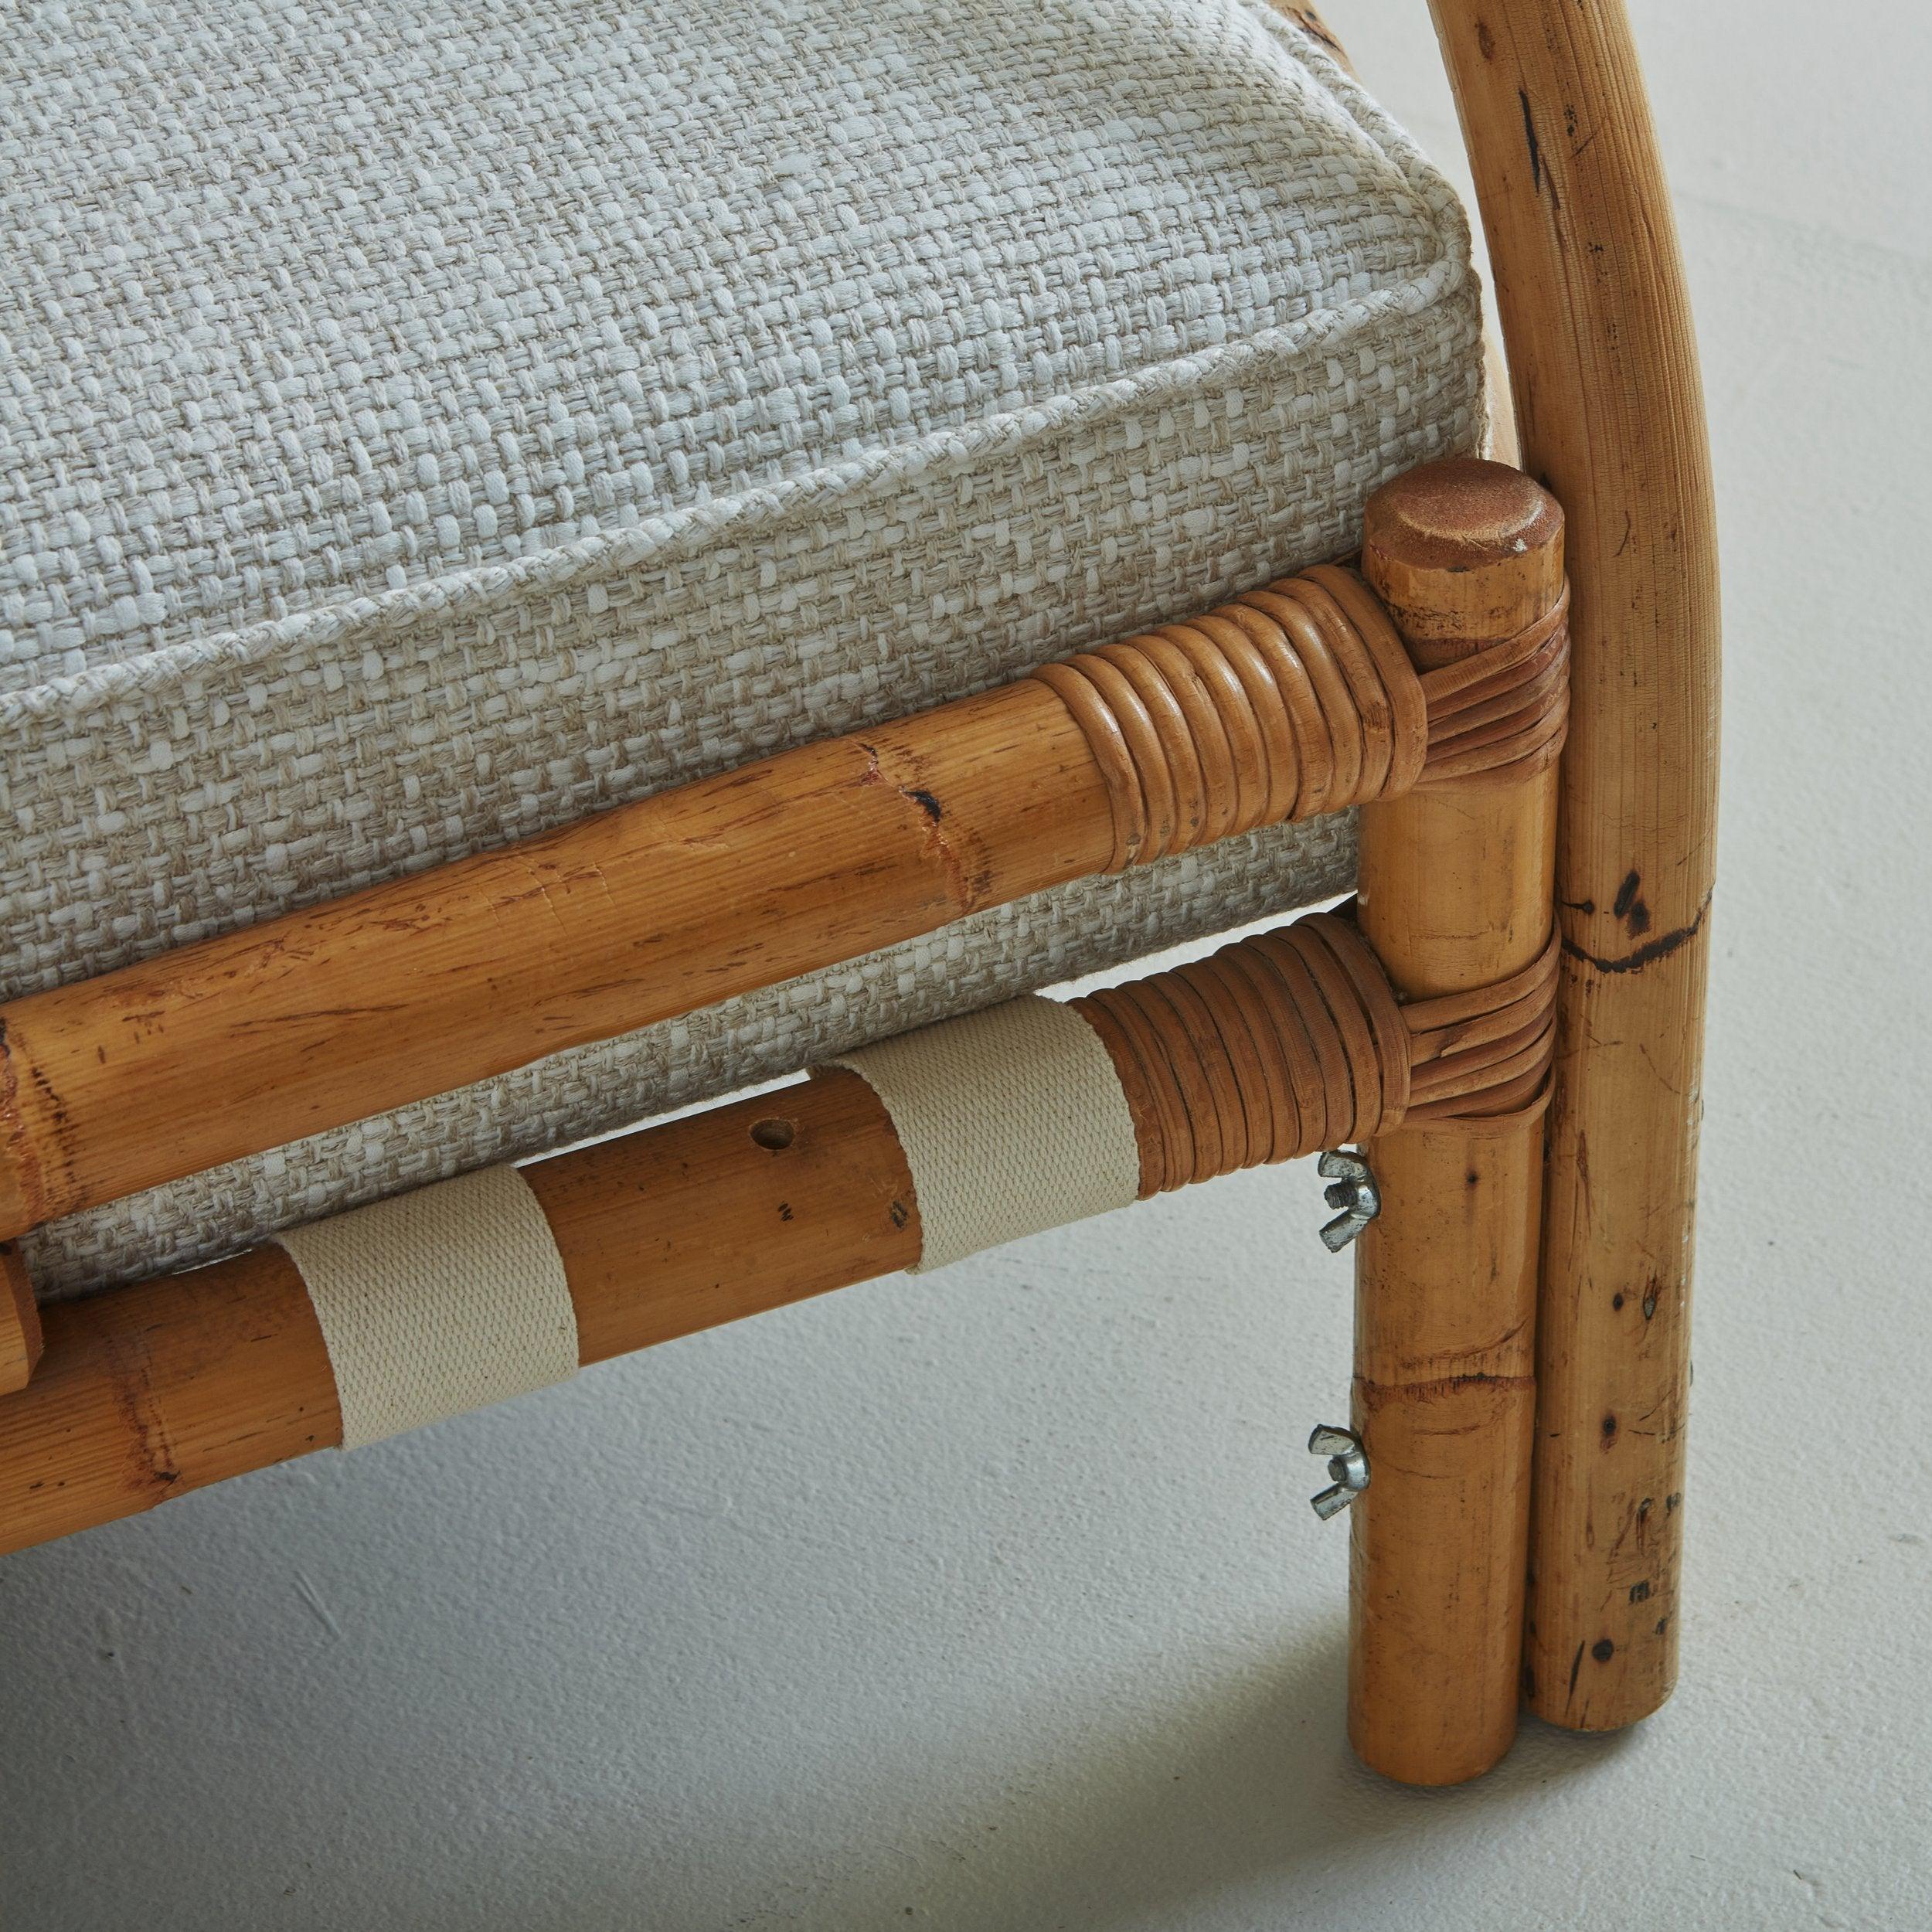 Upholstery Italian Bamboo Daybed with Gray Woven Boucle Cushion, 1970s - 2 Available For Sale